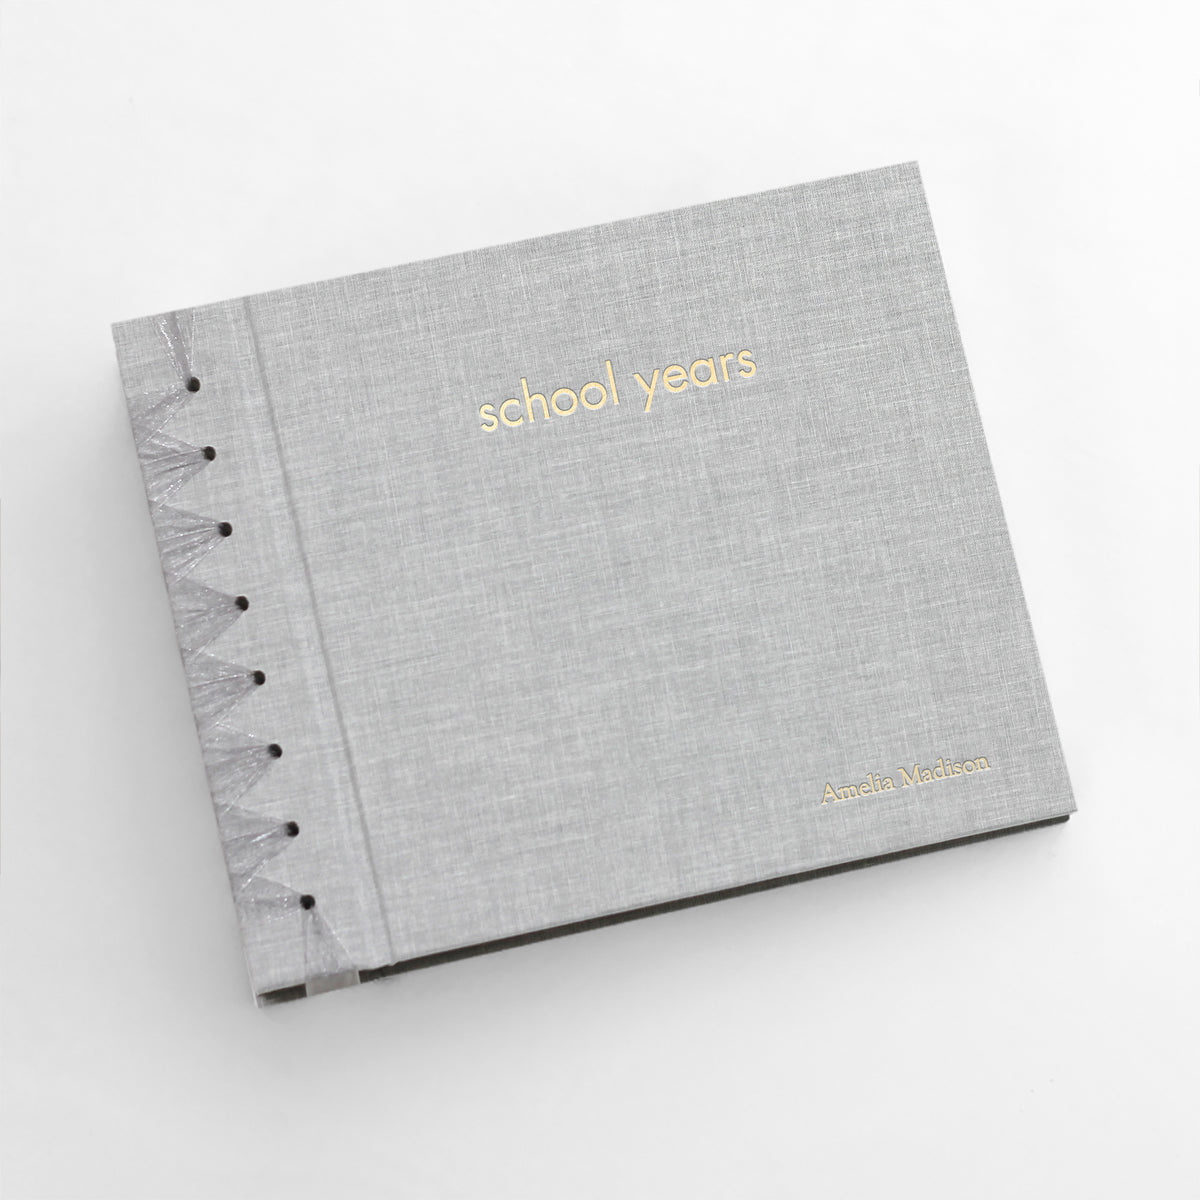 School Years with Dove Gray Linen Cover